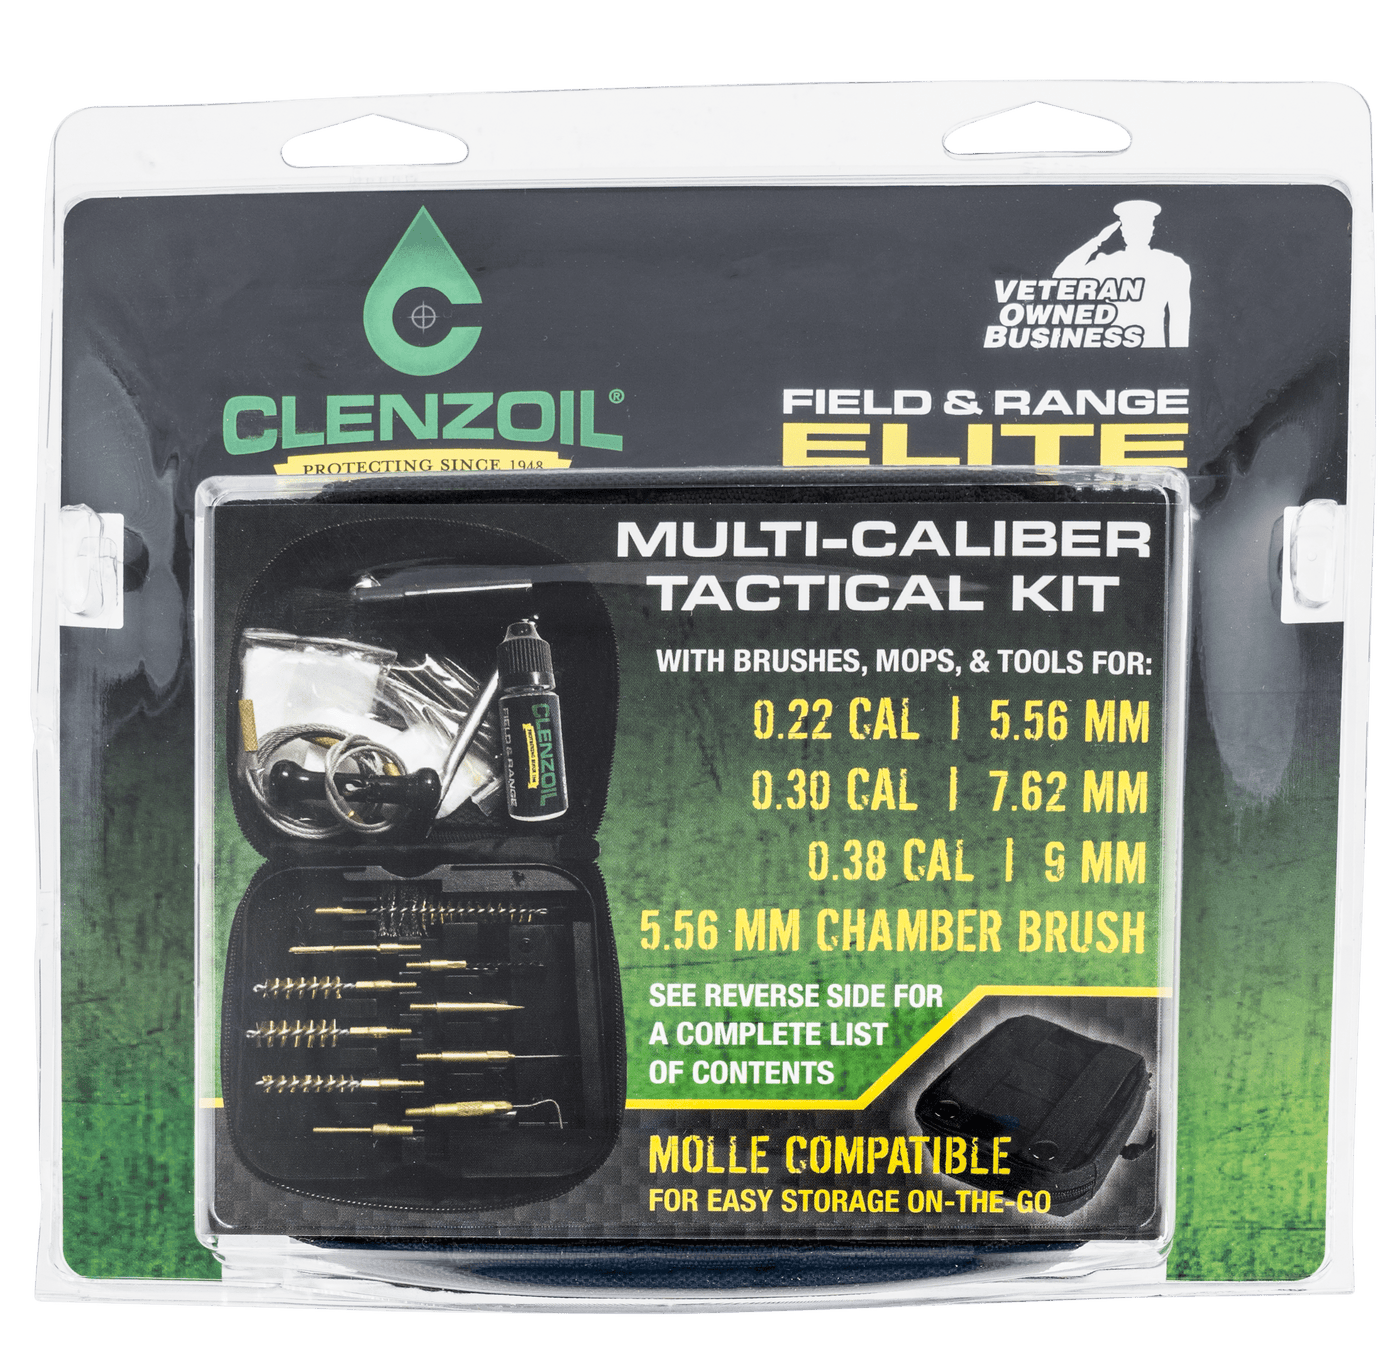 Clenzoil Clenzoil Tactical Cleaning Kit Black Shooting Gear and Acc